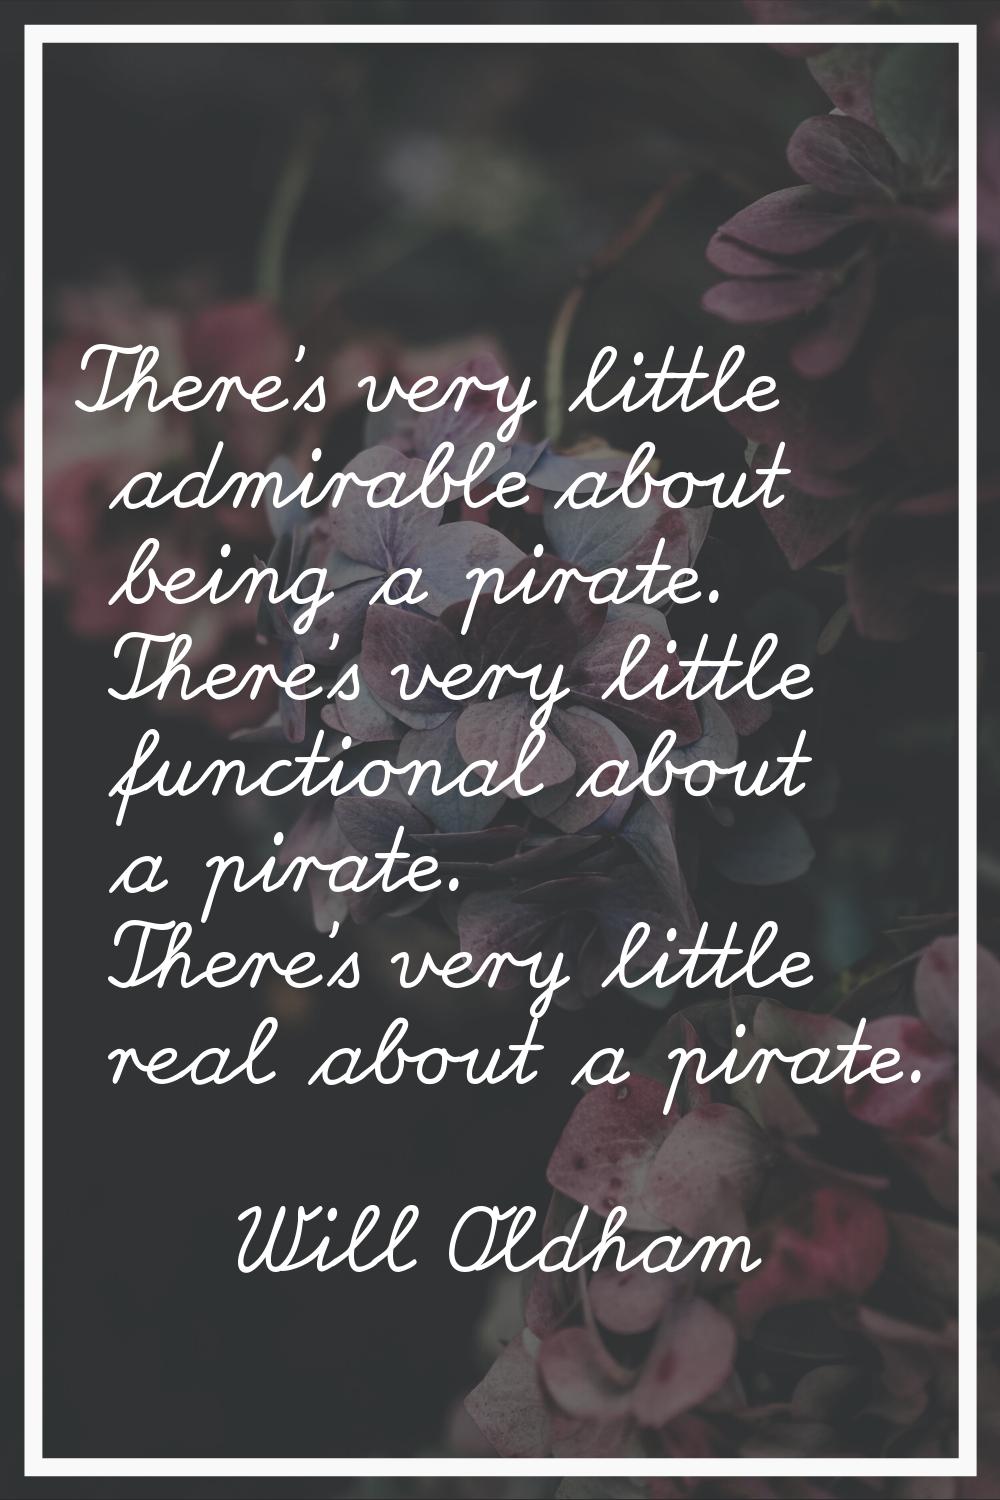 There's very little admirable about being a pirate. There's very little functional about a pirate. 